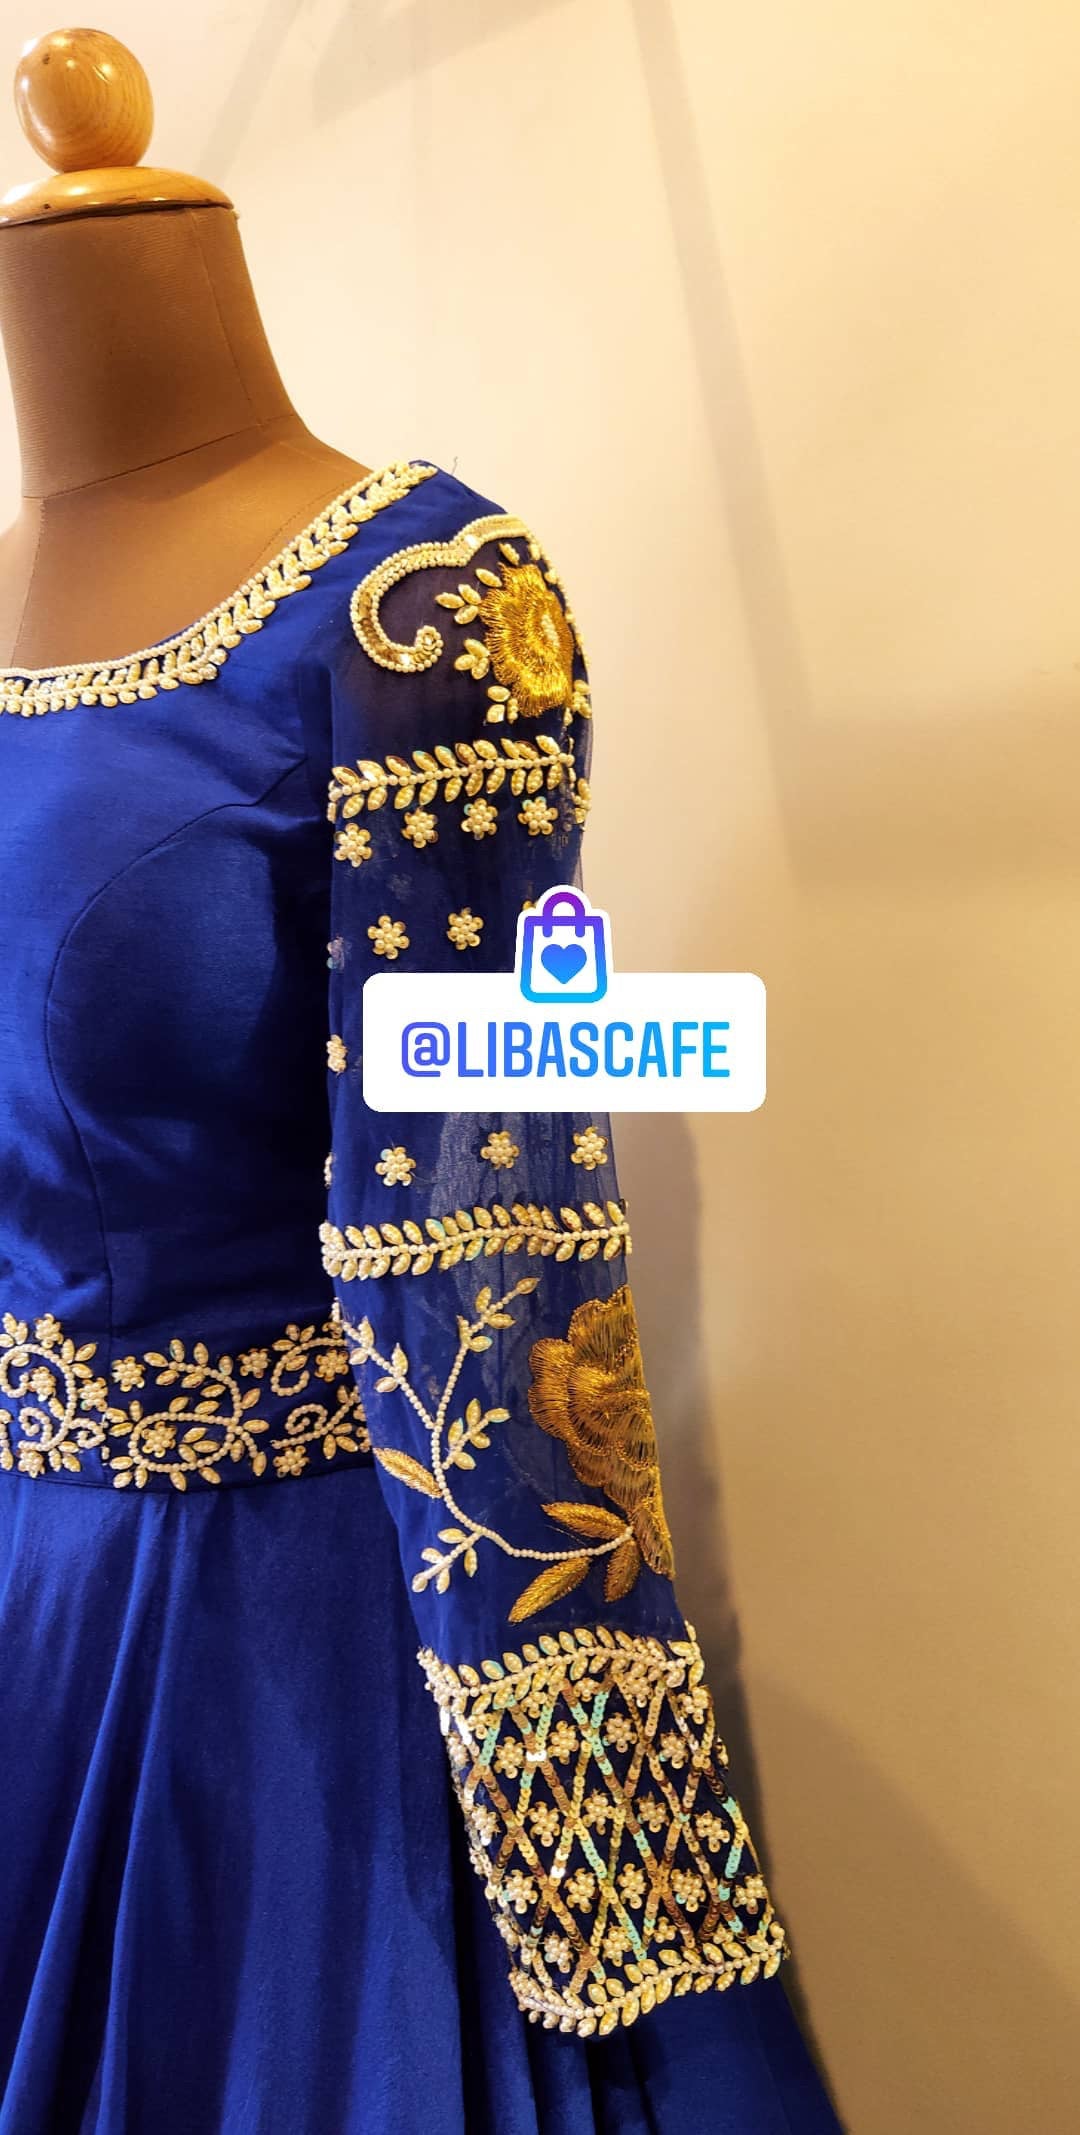 Royal Blue Anarkali Suit With Embroidered Sleeves